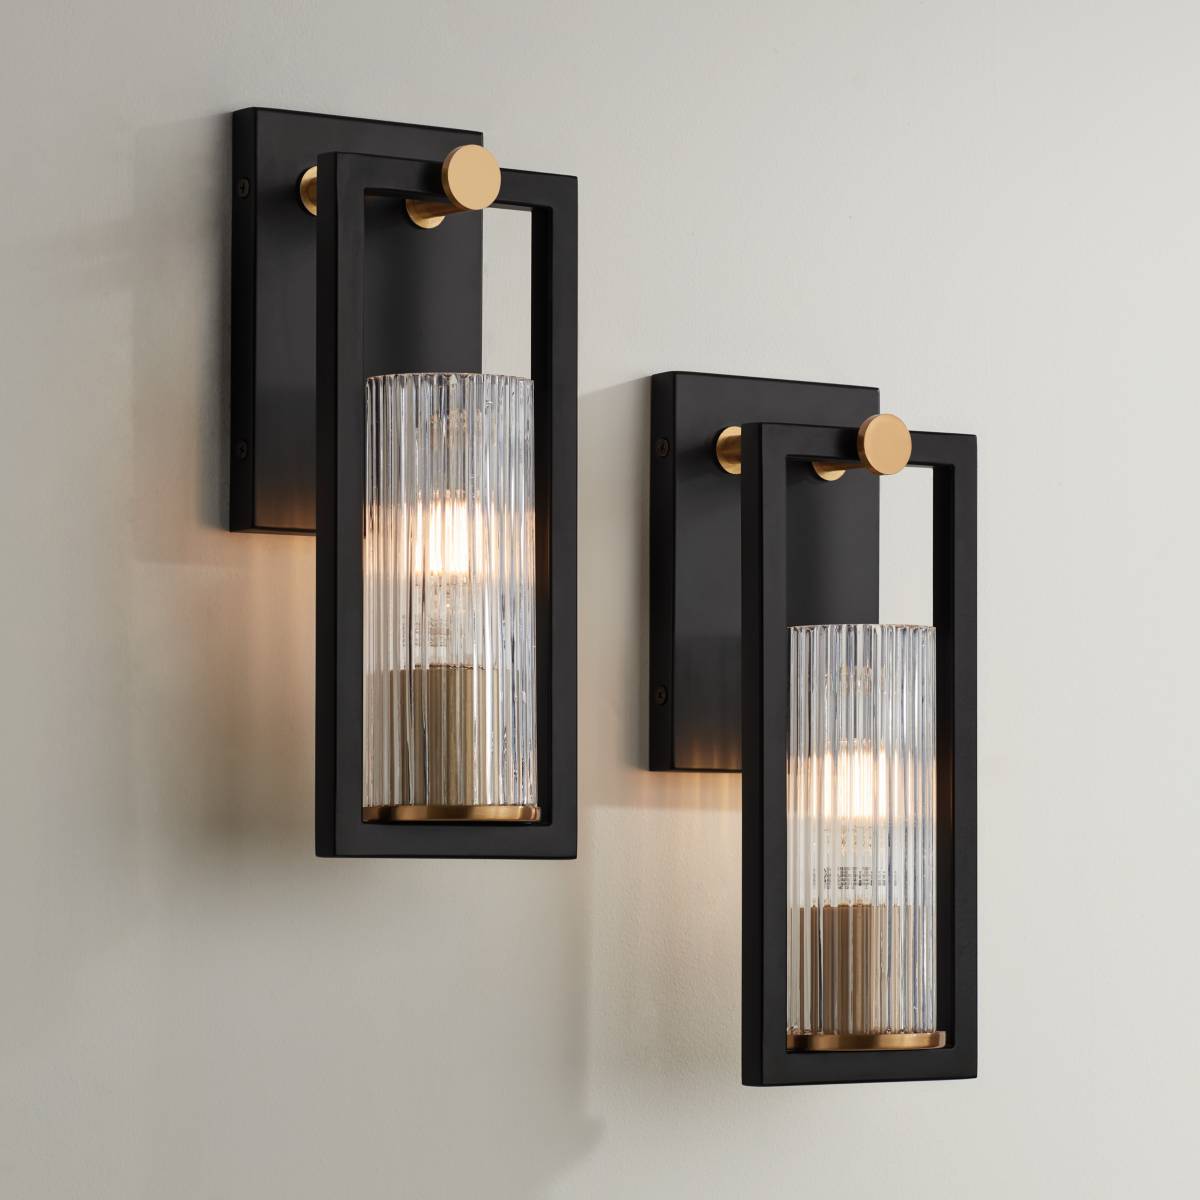 Wall Sconces & Sconce Lights, Wall Lighting